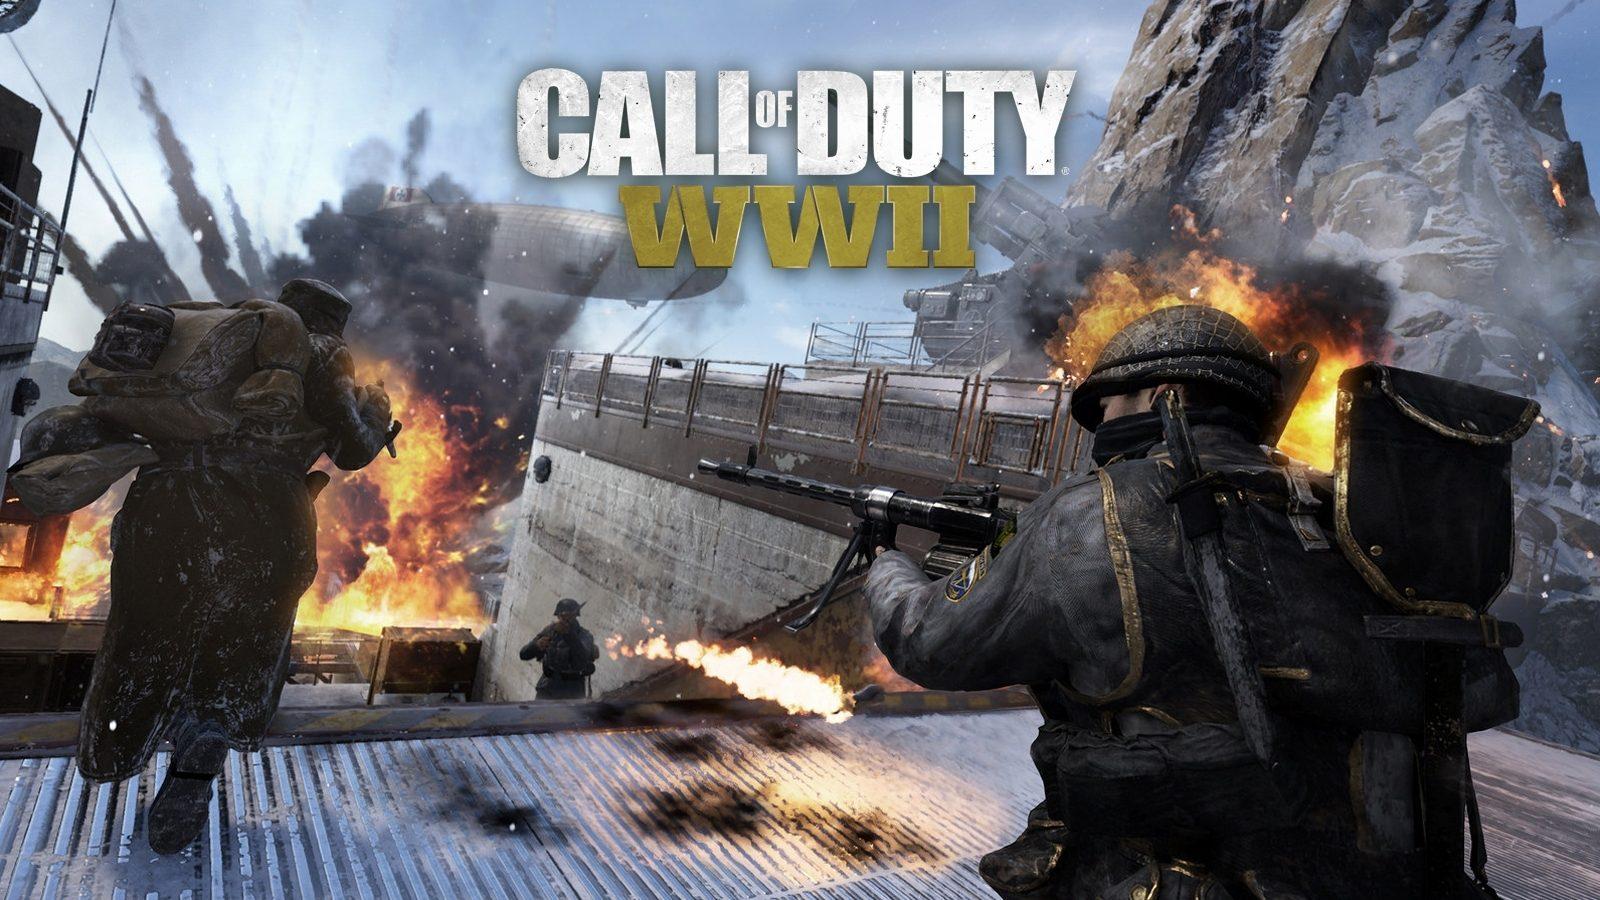 Call of Duty: WWII in Call of Duty 